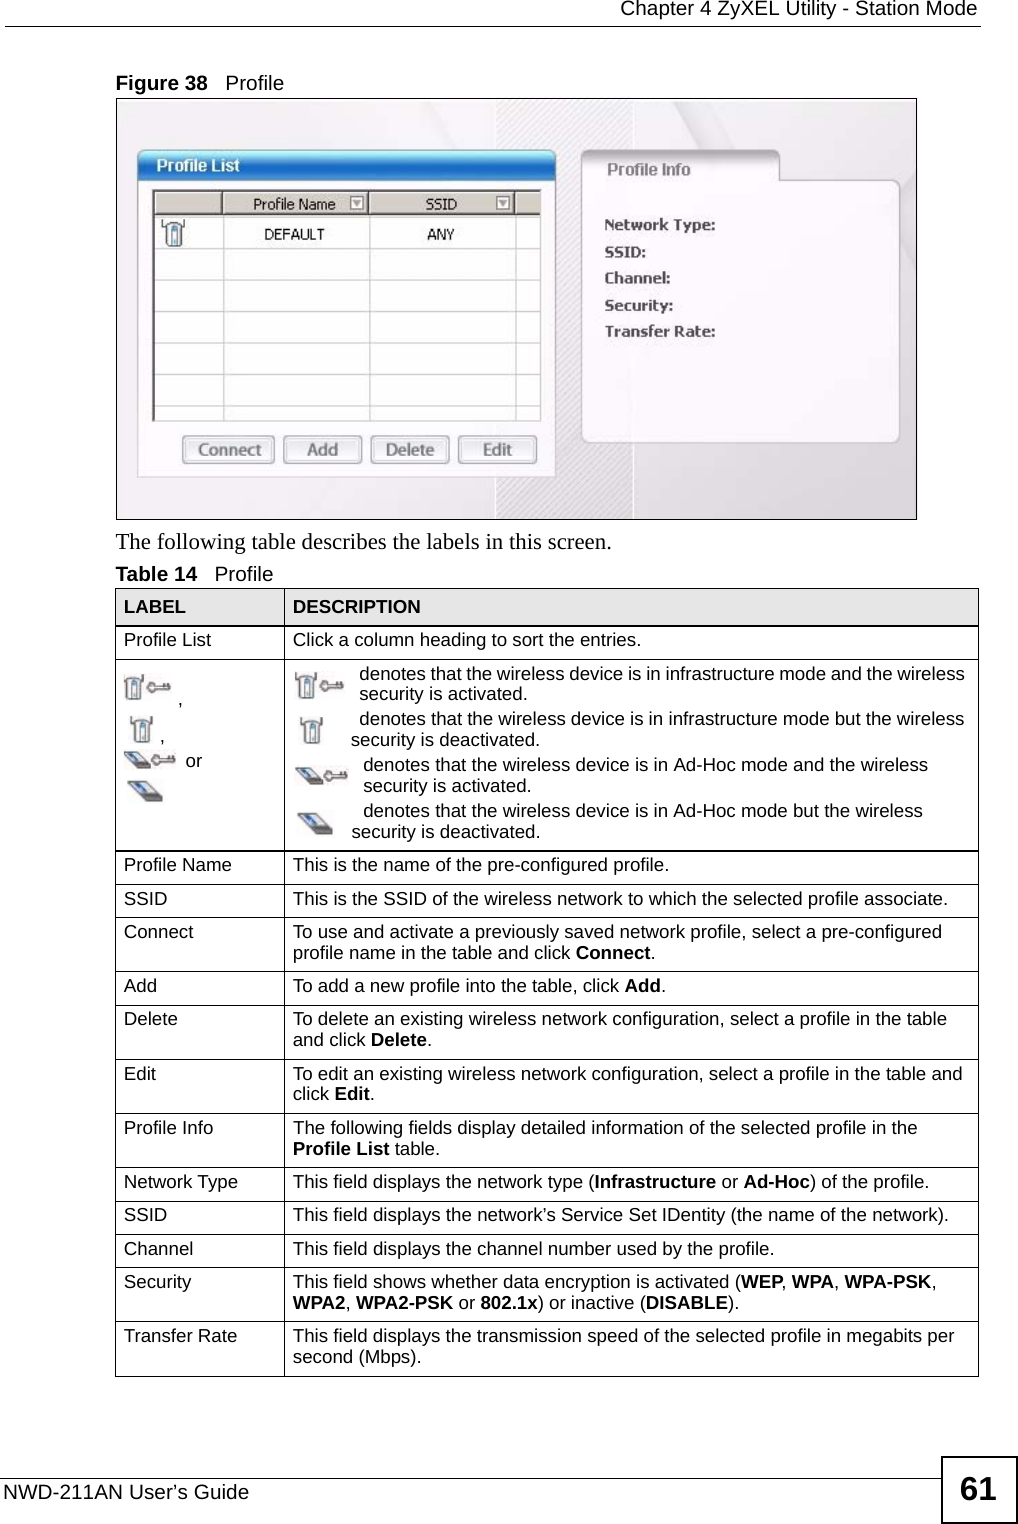  Chapter 4 ZyXEL Utility - Station ModeNWD-211AN User’s Guide 61Figure 38   Profile  The following table describes the labels in this screen. Table 14   Profile LABEL DESCRIPTIONProfile List Click a column heading to sort the entries.,, ordenotes that the wireless device is in infrastructure mode and the wireless security is activated.denotes that the wireless device is in infrastructure mode but the wireless security is deactivated.denotes that the wireless device is in Ad-Hoc mode and the wireless security is activated.denotes that the wireless device is in Ad-Hoc mode but the wireless security is deactivated.Profile Name This is the name of the pre-configured profile.SSID This is the SSID of the wireless network to which the selected profile associate.Connect  To use and activate a previously saved network profile, select a pre-configured profile name in the table and click Connect.Add  To add a new profile into the table, click Add.Delete To delete an existing wireless network configuration, select a profile in the table and click Delete.Edit To edit an existing wireless network configuration, select a profile in the table and click Edit.Profile Info The following fields display detailed information of the selected profile in the Profile List table.Network Type This field displays the network type (Infrastructure or Ad-Hoc) of the profile.SSID This field displays the network’s Service Set IDentity (the name of the network).Channel This field displays the channel number used by the profile.Security This field shows whether data encryption is activated (WEP, WPA, WPA-PSK, WPA2, WPA2-PSK or 802.1x) or inactive (DISABLE).Transfer Rate This field displays the transmission speed of the selected profile in megabits per second (Mbps).